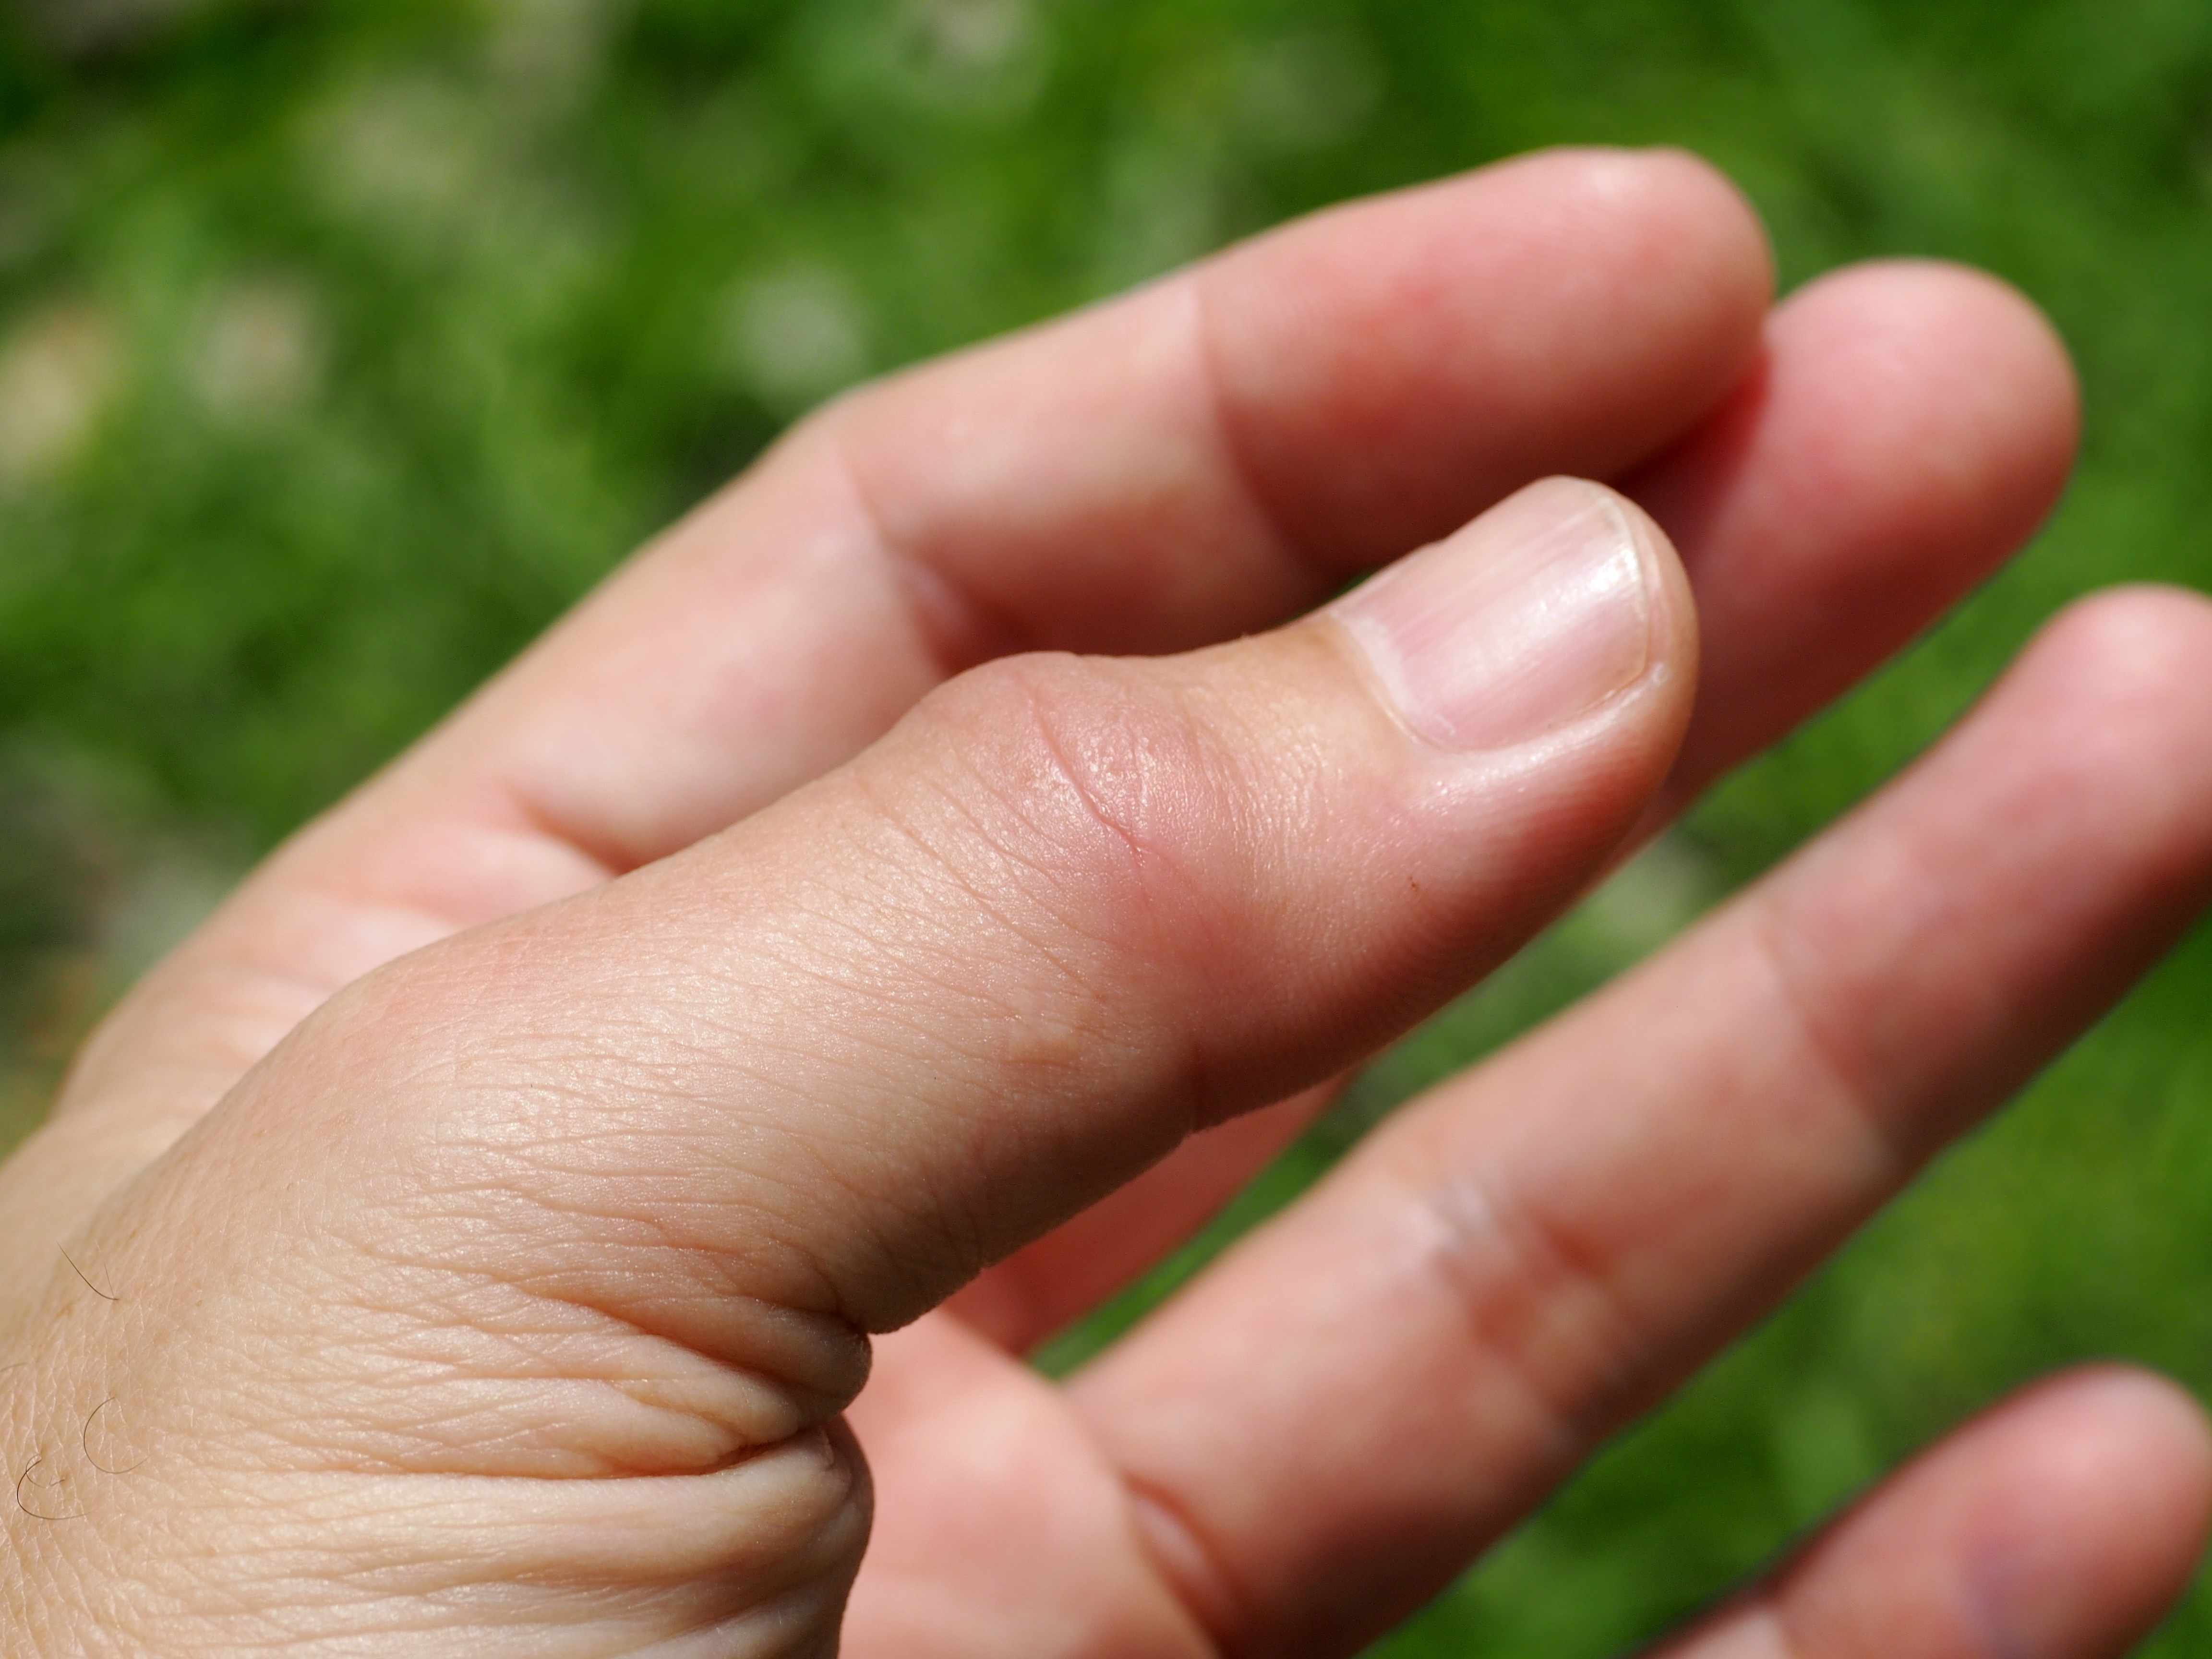 Home Remedies: Just jammed your finger? – Mayo Clinic News Network